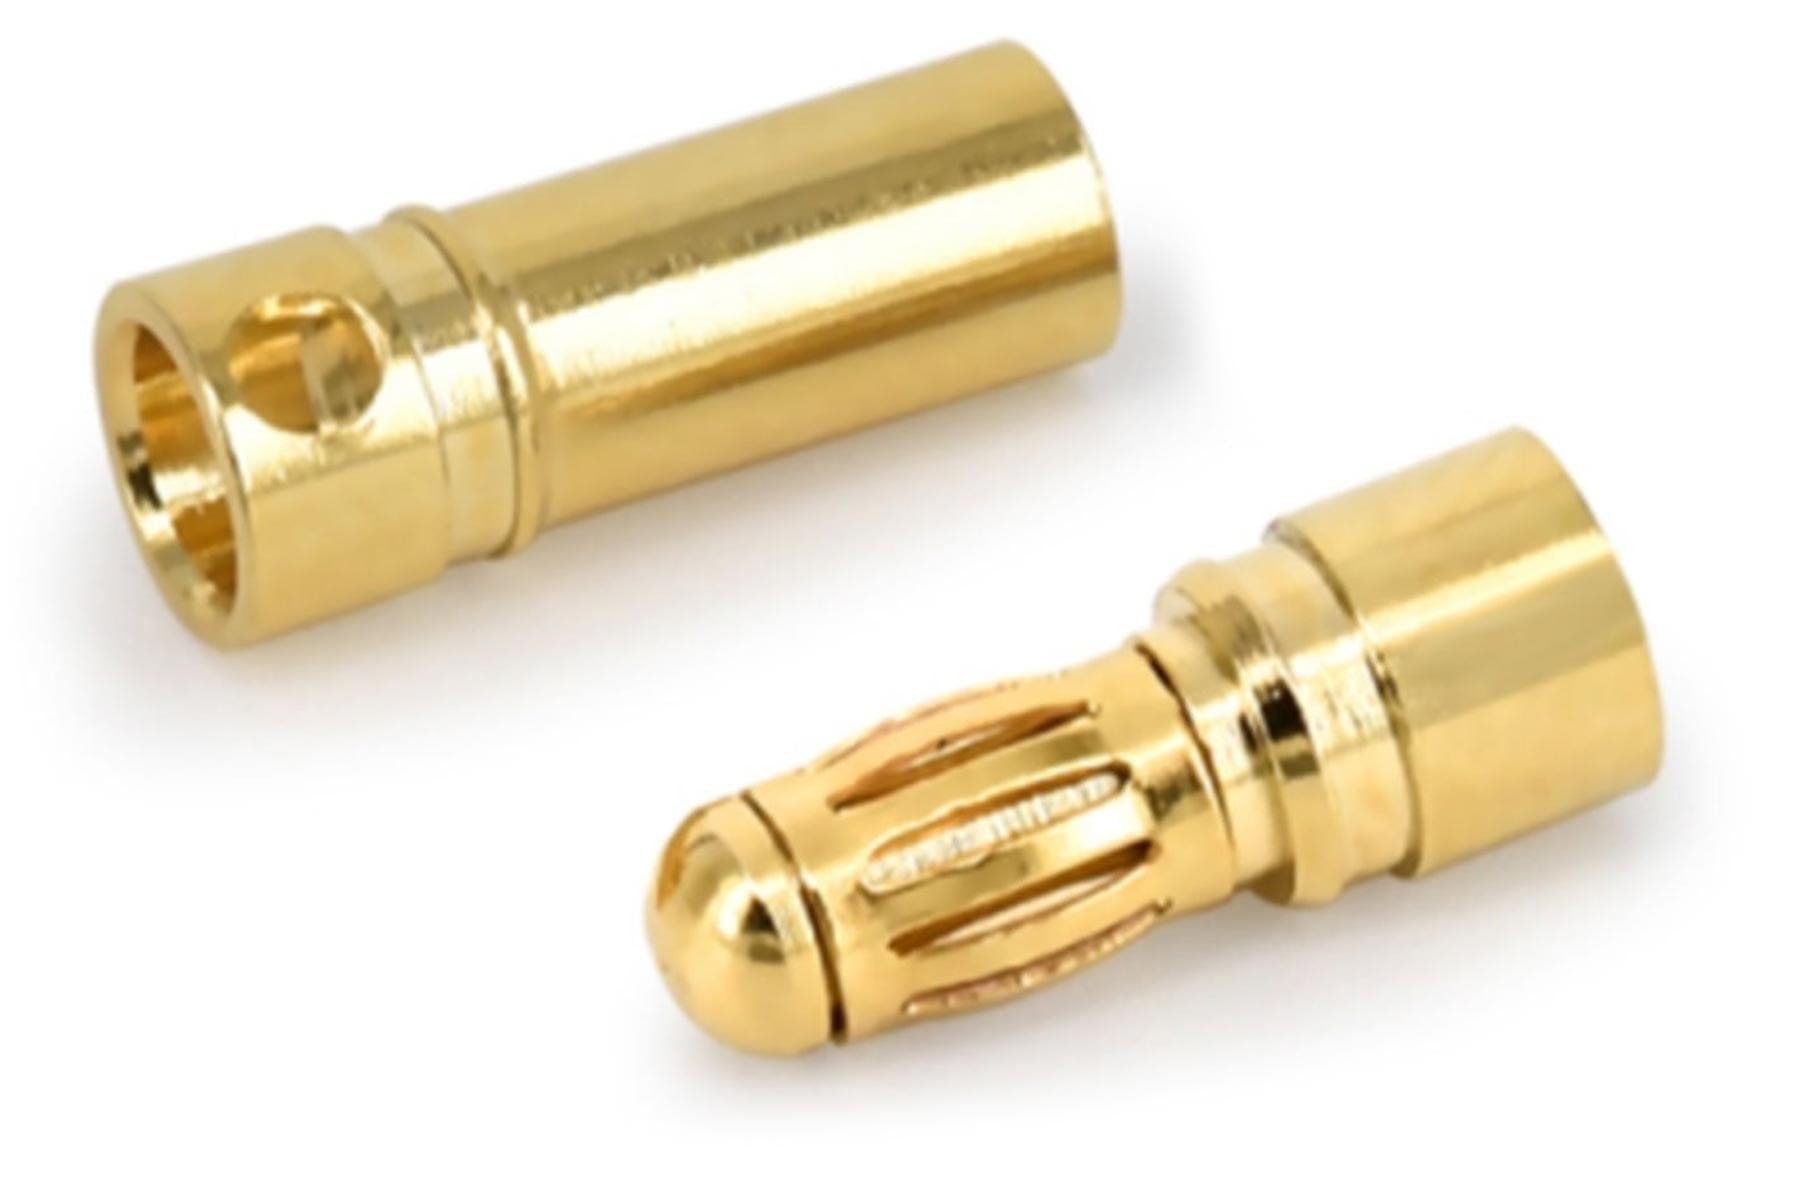 BenchCraft 3.5mm Gold Bullet ESC and Motor Connectors (Pair) BCT5062-024